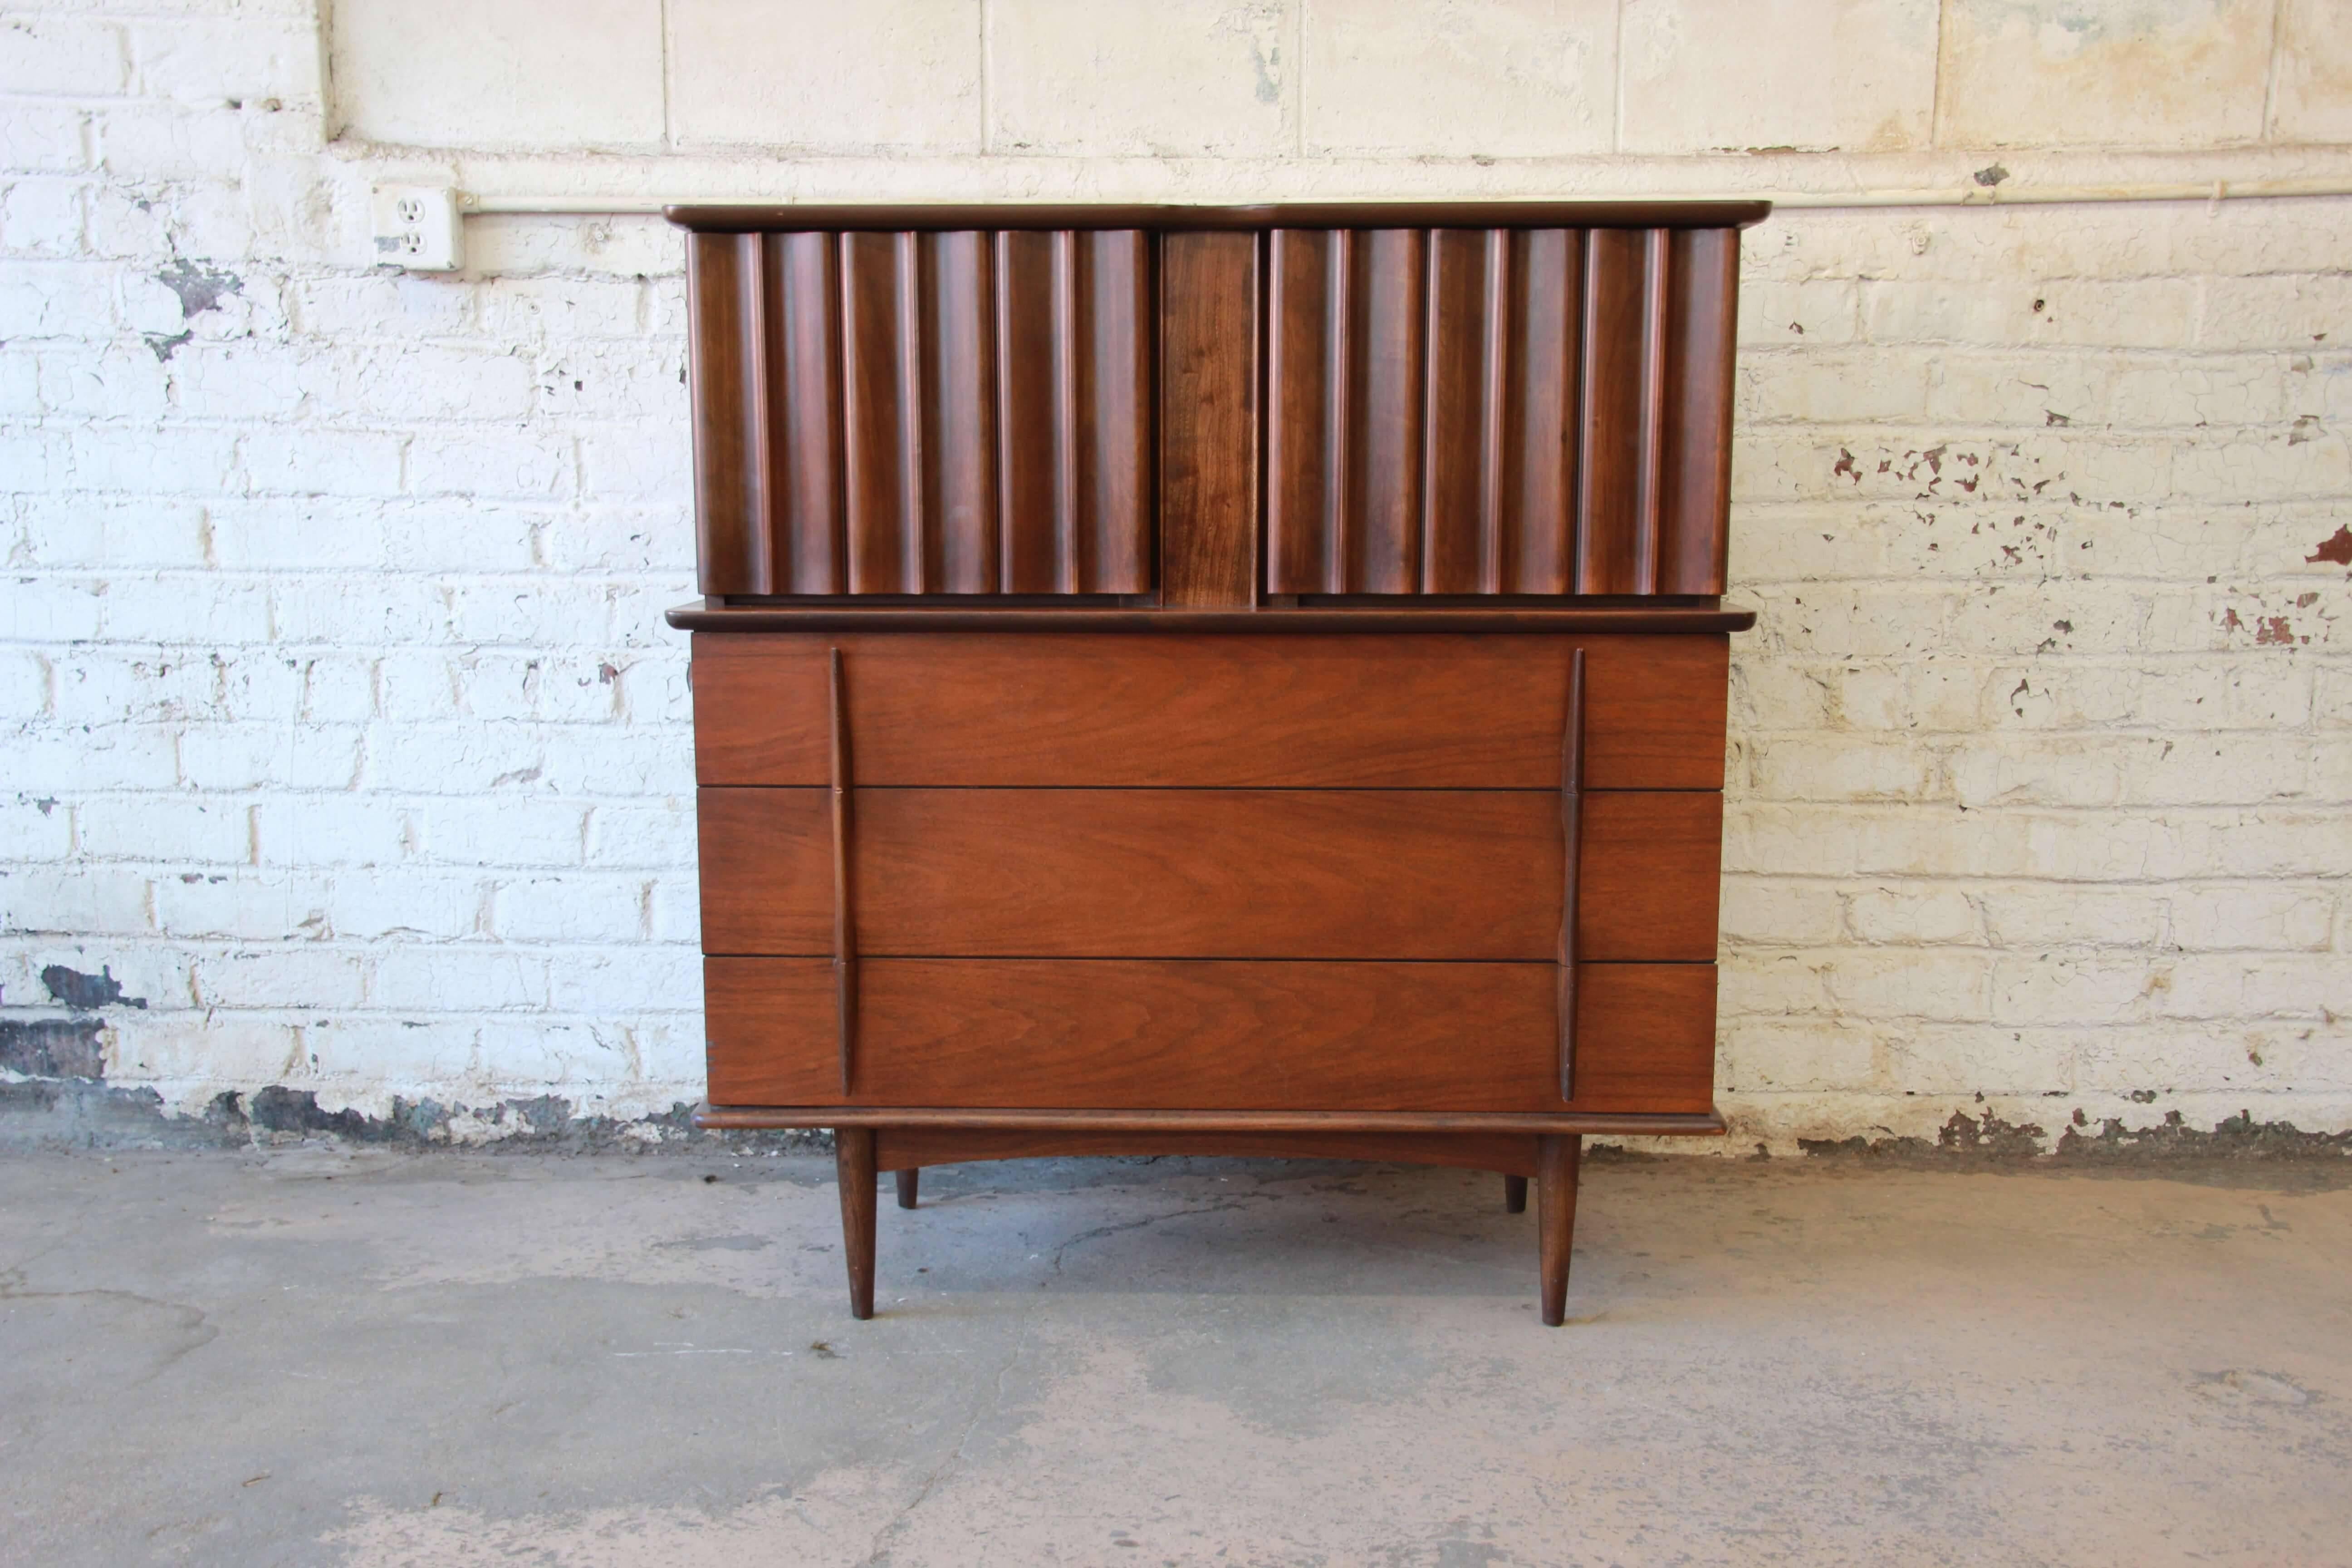 Offering a very nice sculpted walnut highboy dresser by United Furniture Co. The dresser has unique sculpted pulls on the bottom three drawers that open and close smoothly. Above are two cabinet doors that open to reveal four additional drawers for